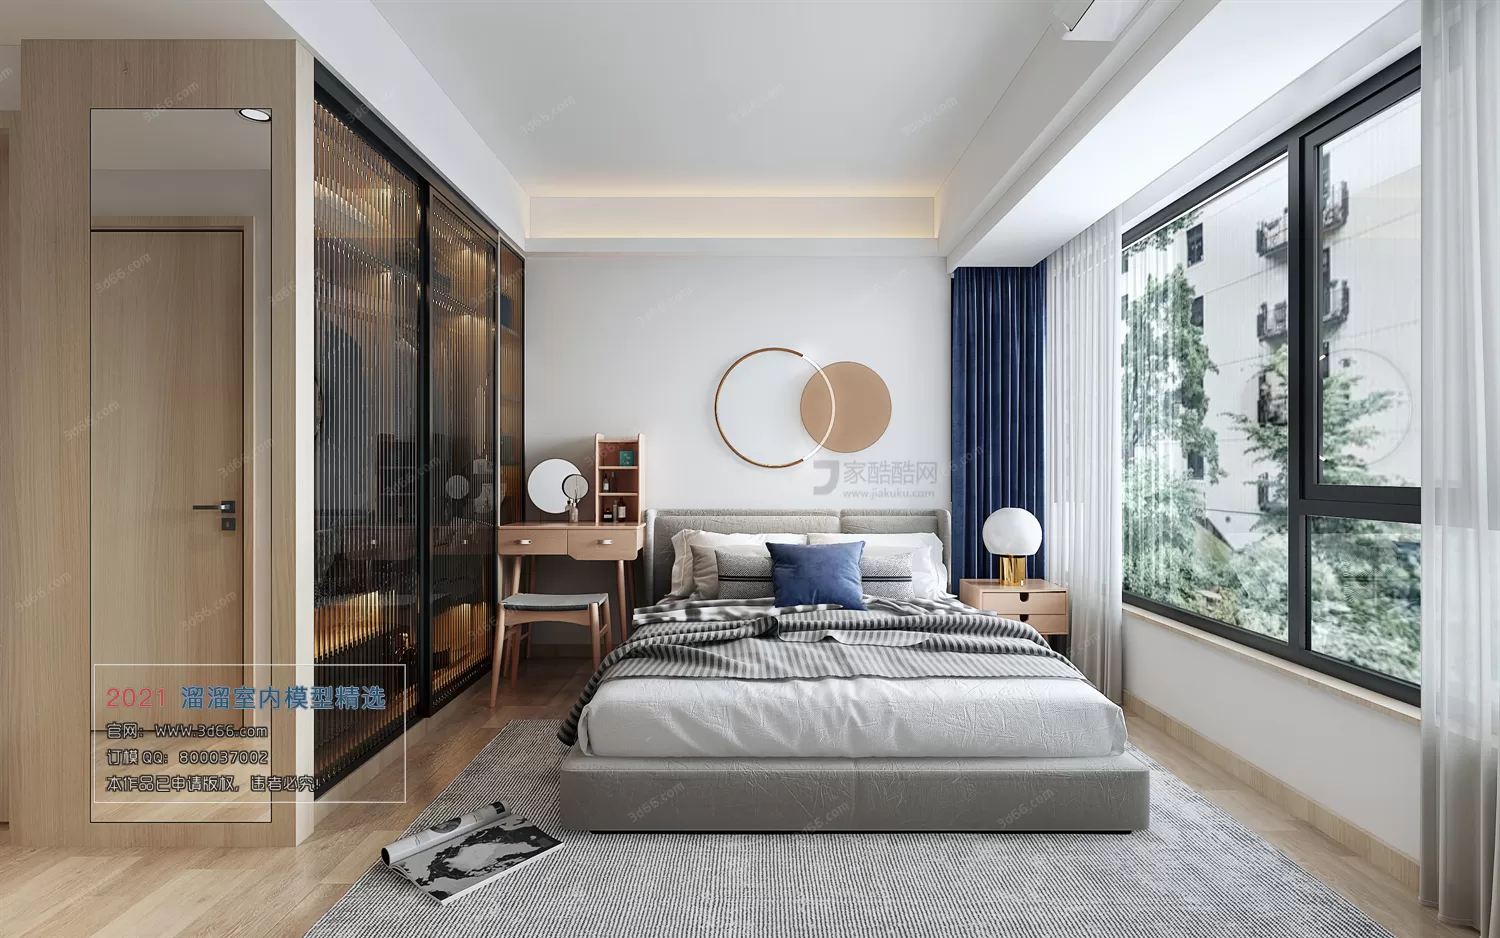 BEDROOM – A025-Modern style-Vray model